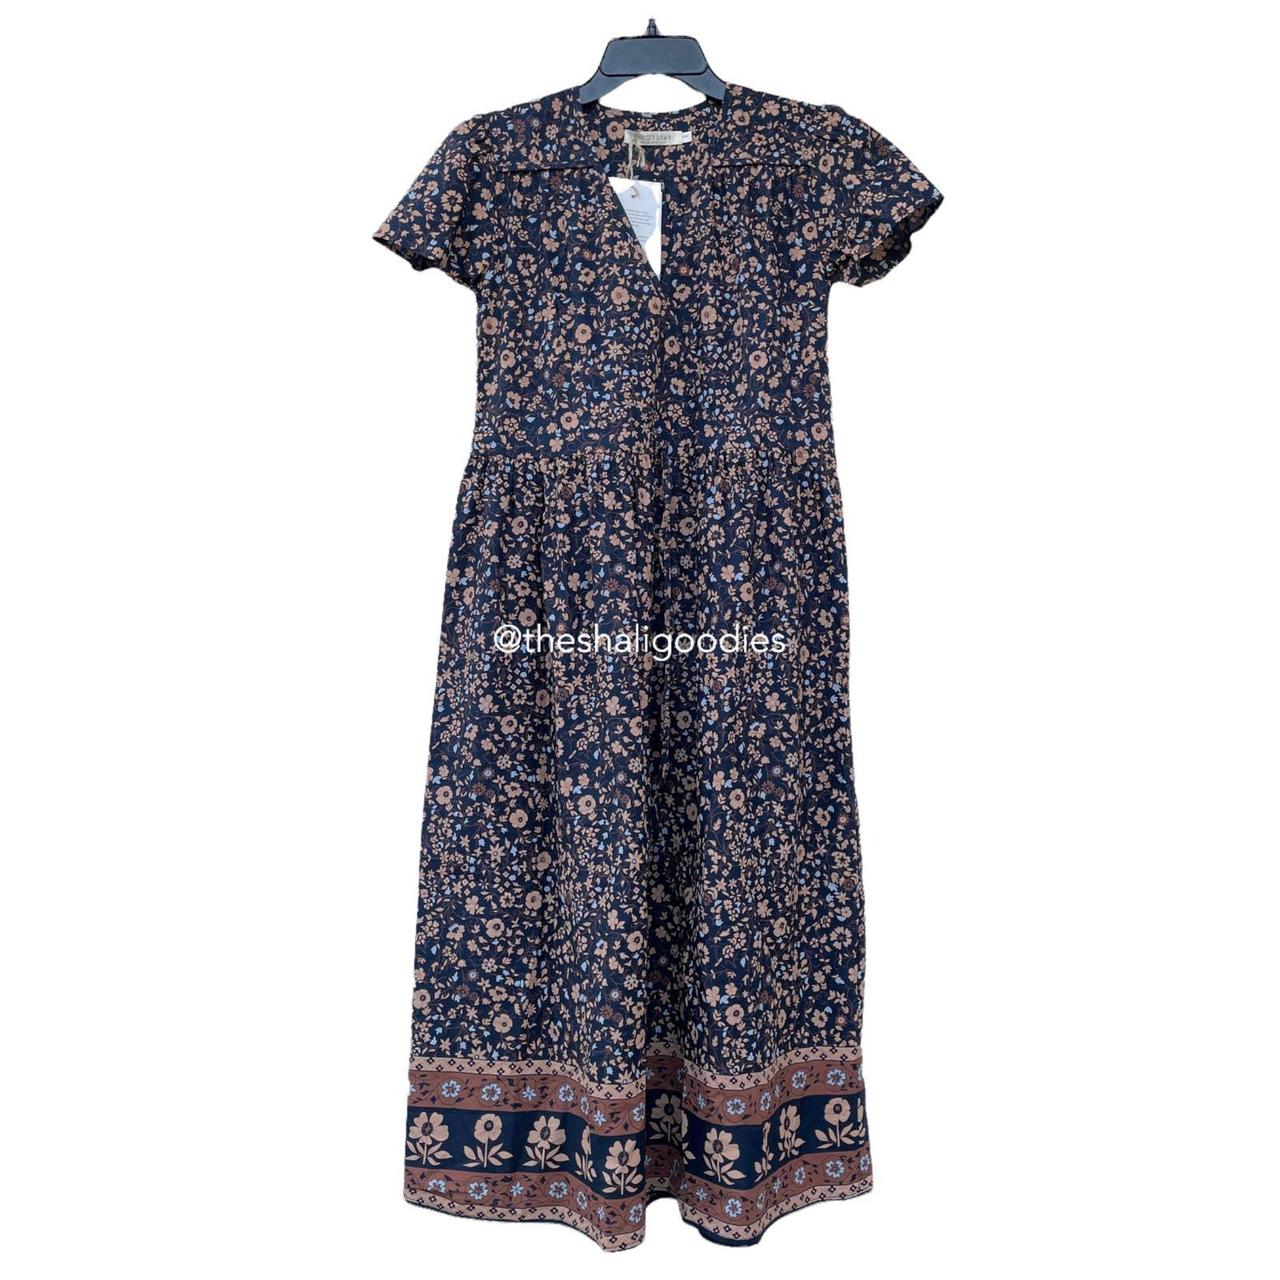 Product Image 1 - CHRISTY DAWN The Dawn Dress

*Very